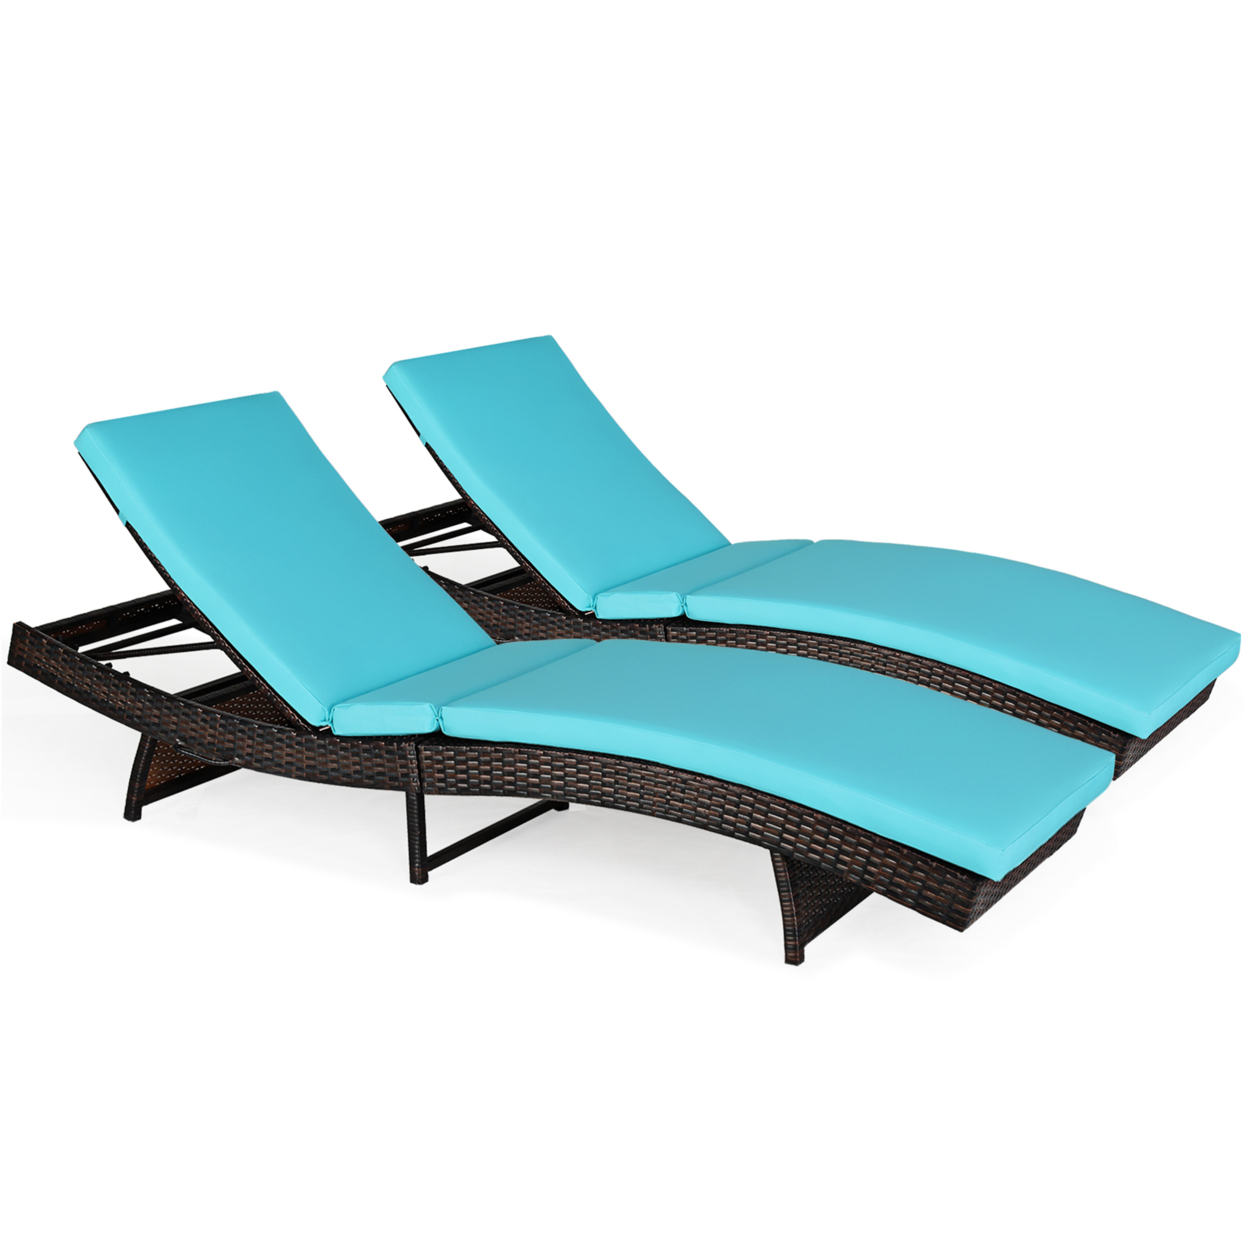 Set Of 2 Foldable Patio Rattan Chaise Lounge Chair W/5 Back Positions Turquoise Cushion